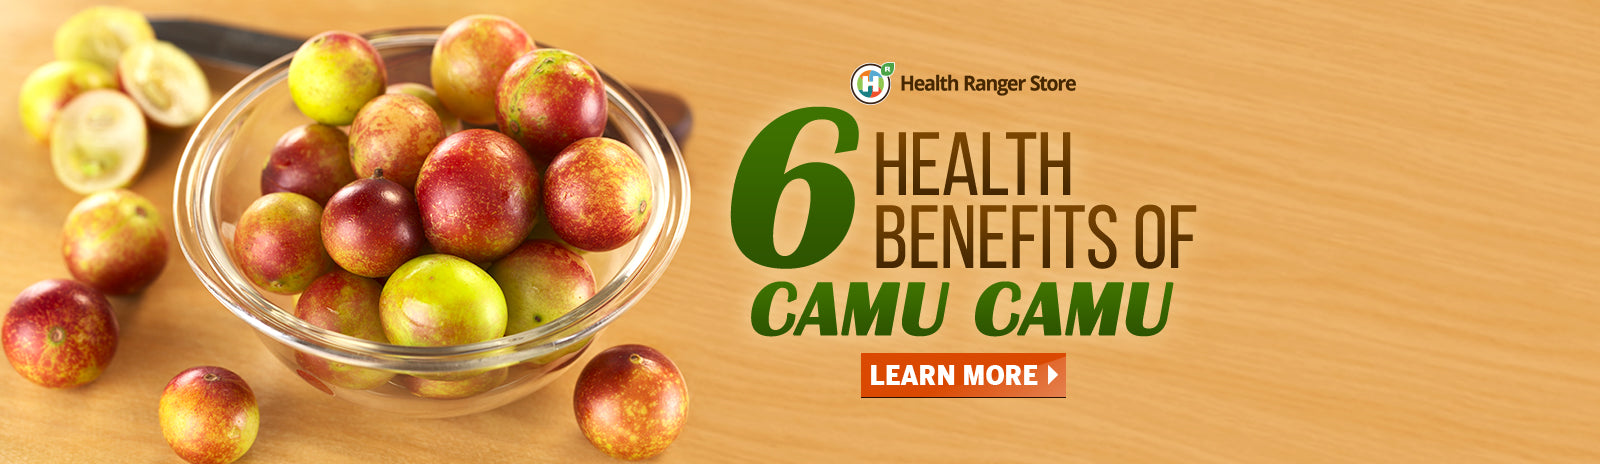 Camu Camu: All about this immune-supporting berry (Plus 3 must-try recipes)